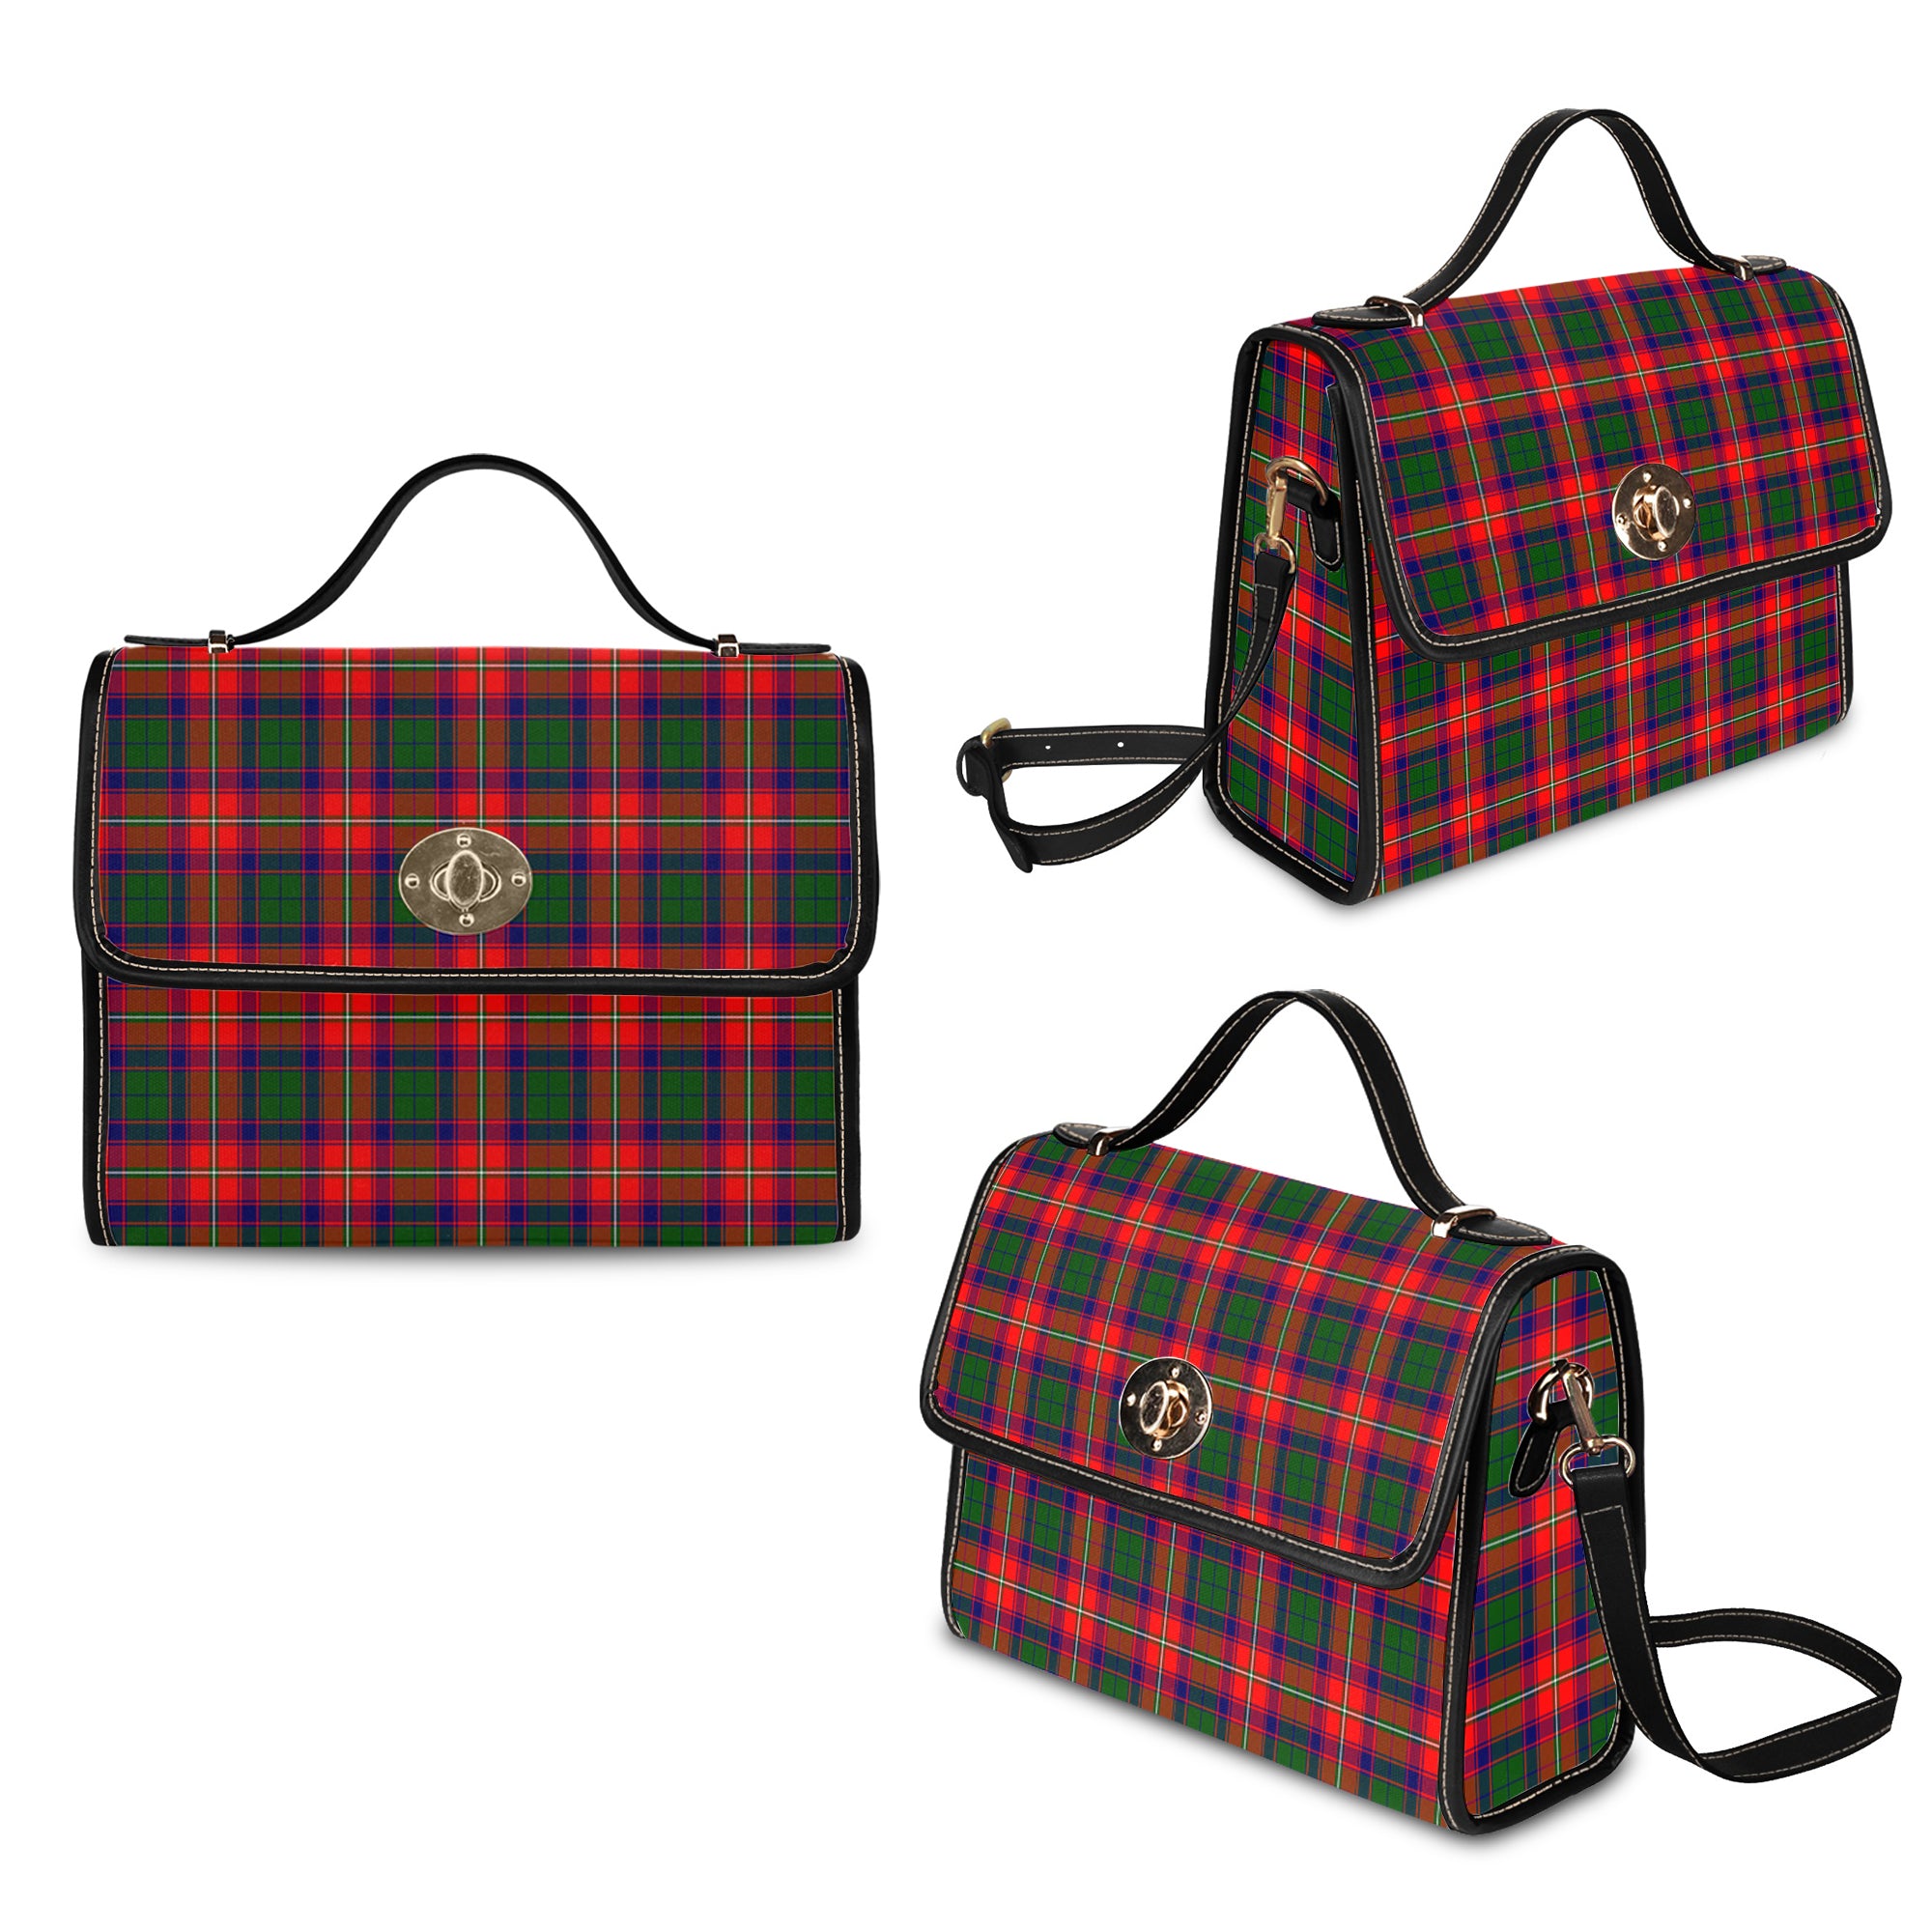 wauchope-tartan-canvas-bag-with-leather-shoulder-strap